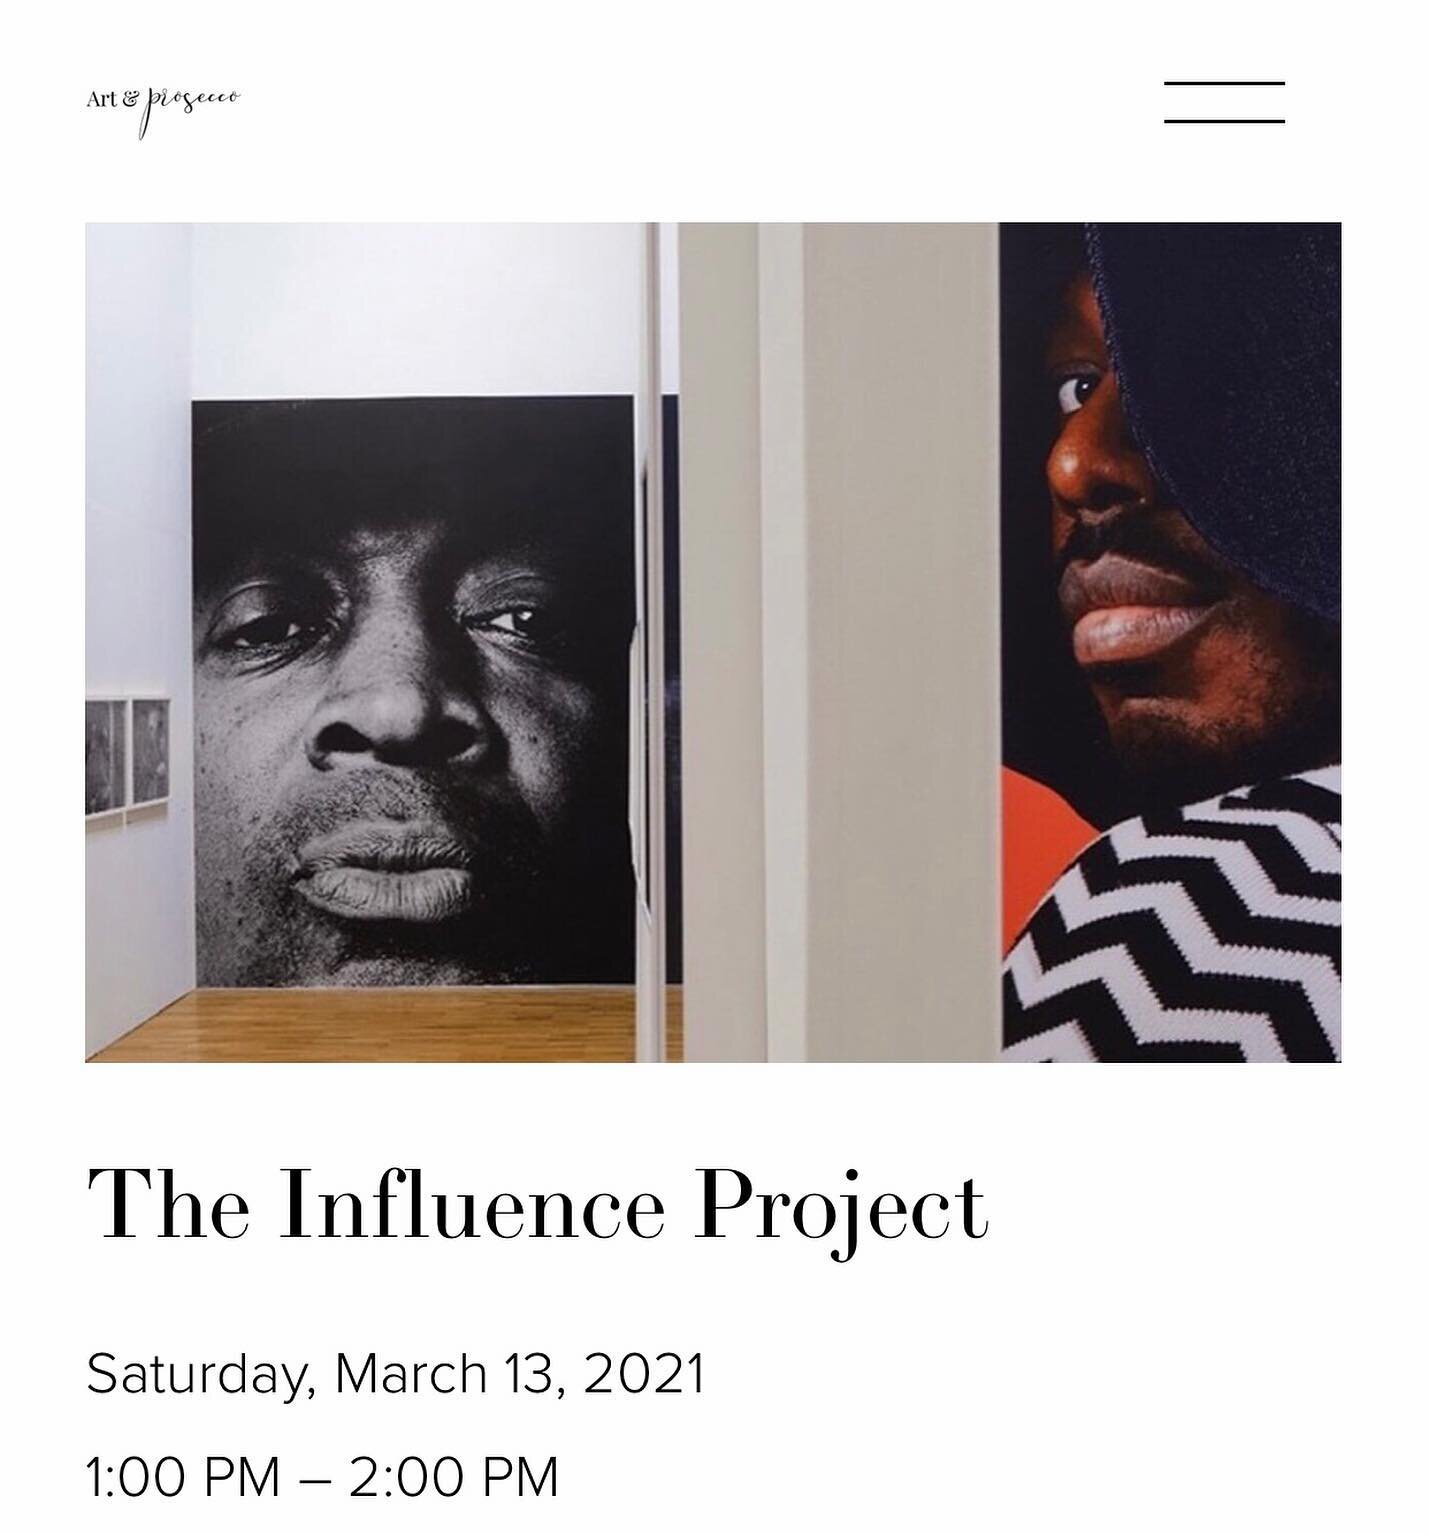 The #artcalander for March 2021 is now in full swing for online gallery hopping 💃🏾 

We hope you can join us as we are so excited for the first exhibition this Saturday for the influence project. From 1pm - 2pm. 

The Influence Project celebrates t